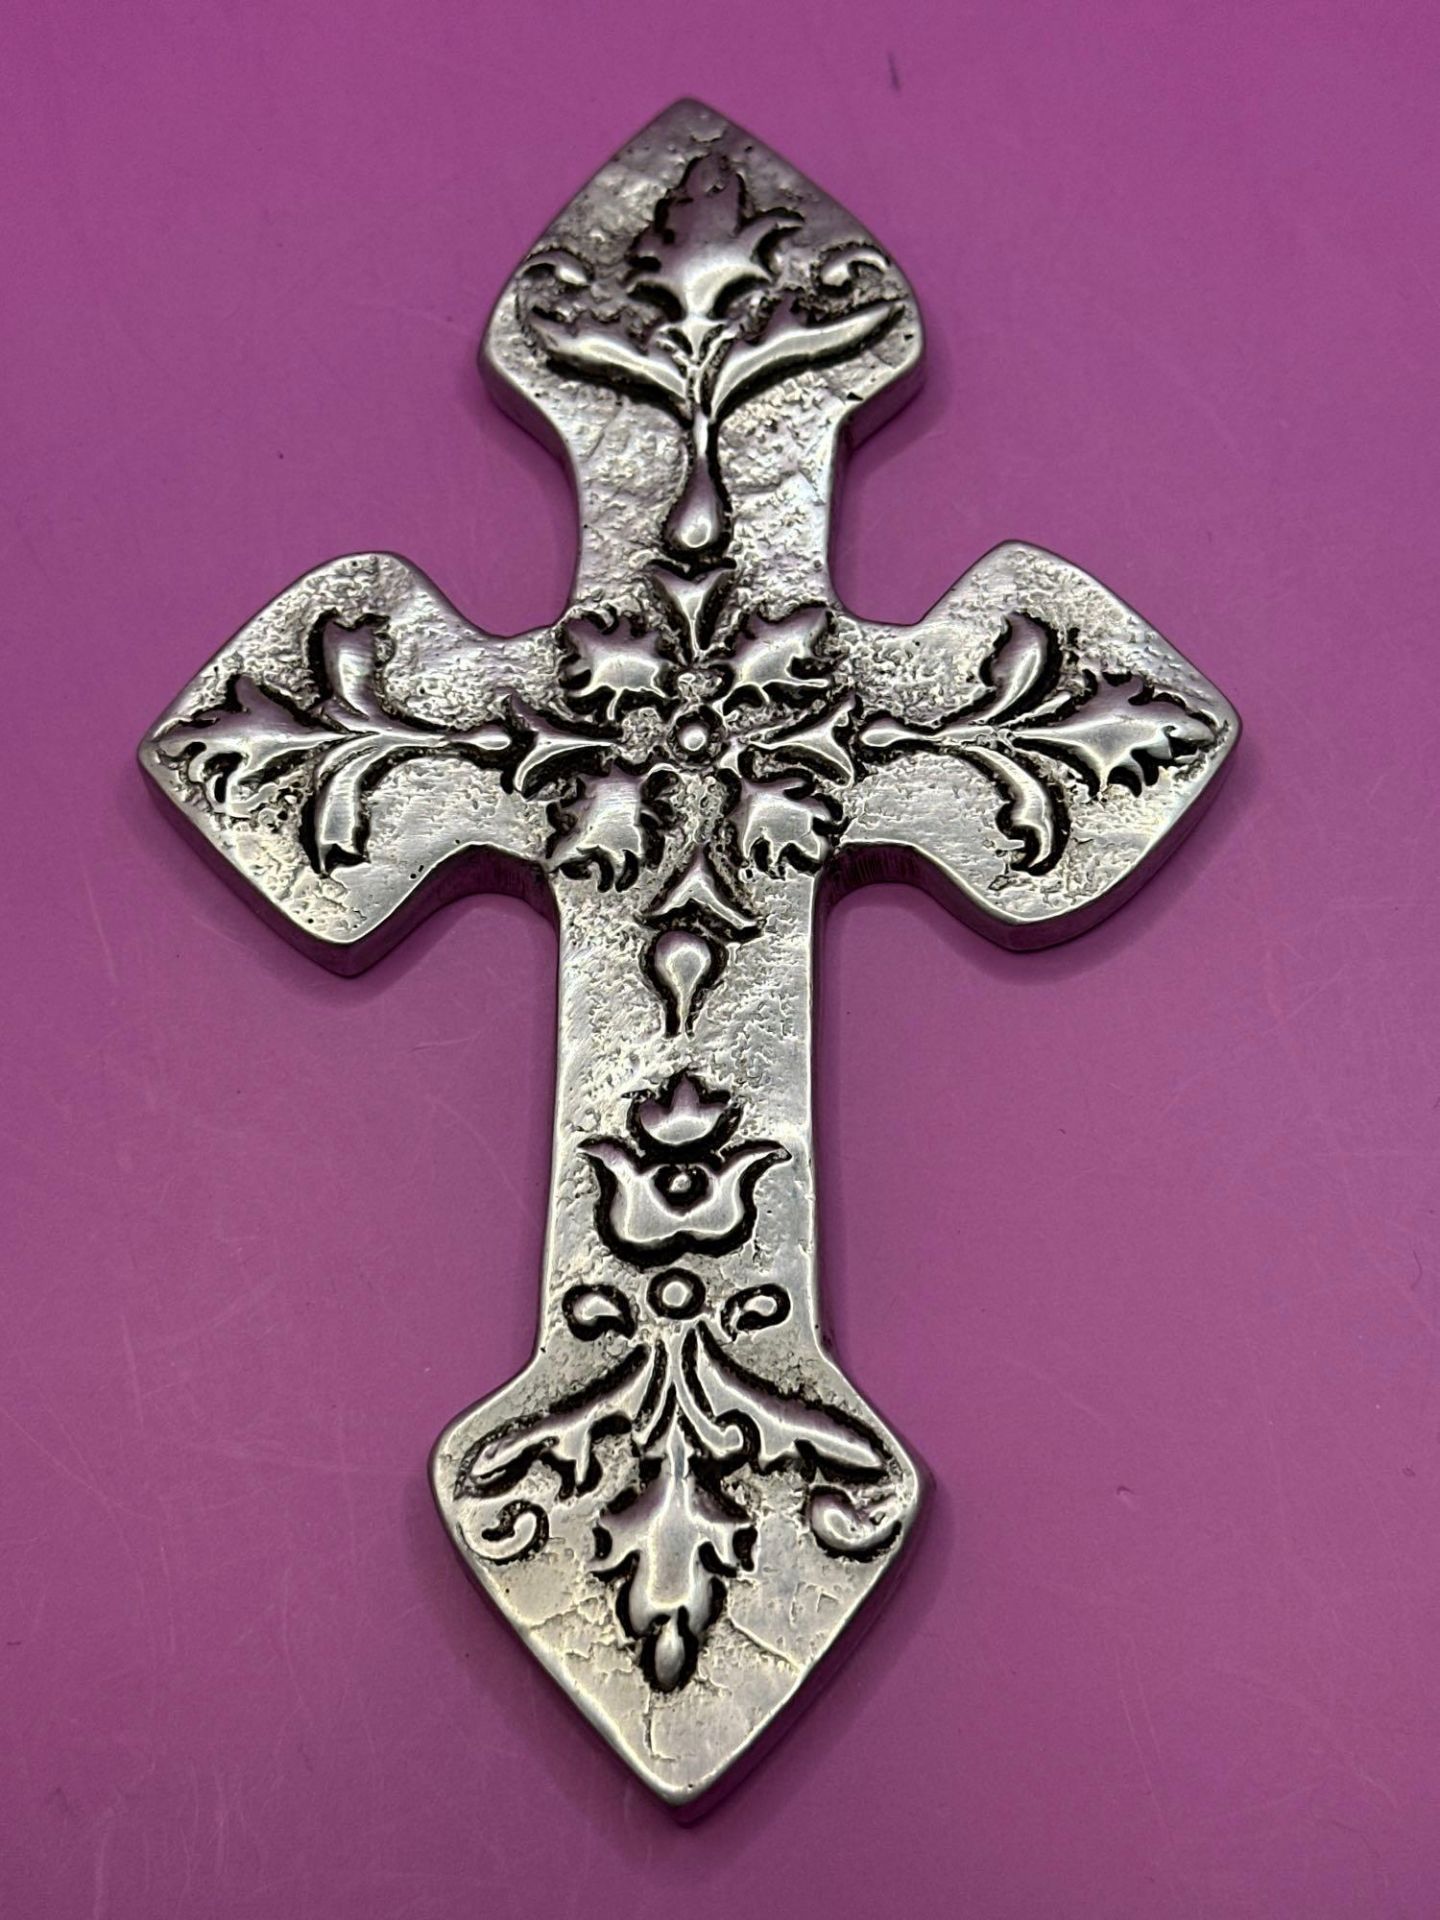 Vintage Mexican Pewter Cross 16 cm - Image 3 of 3